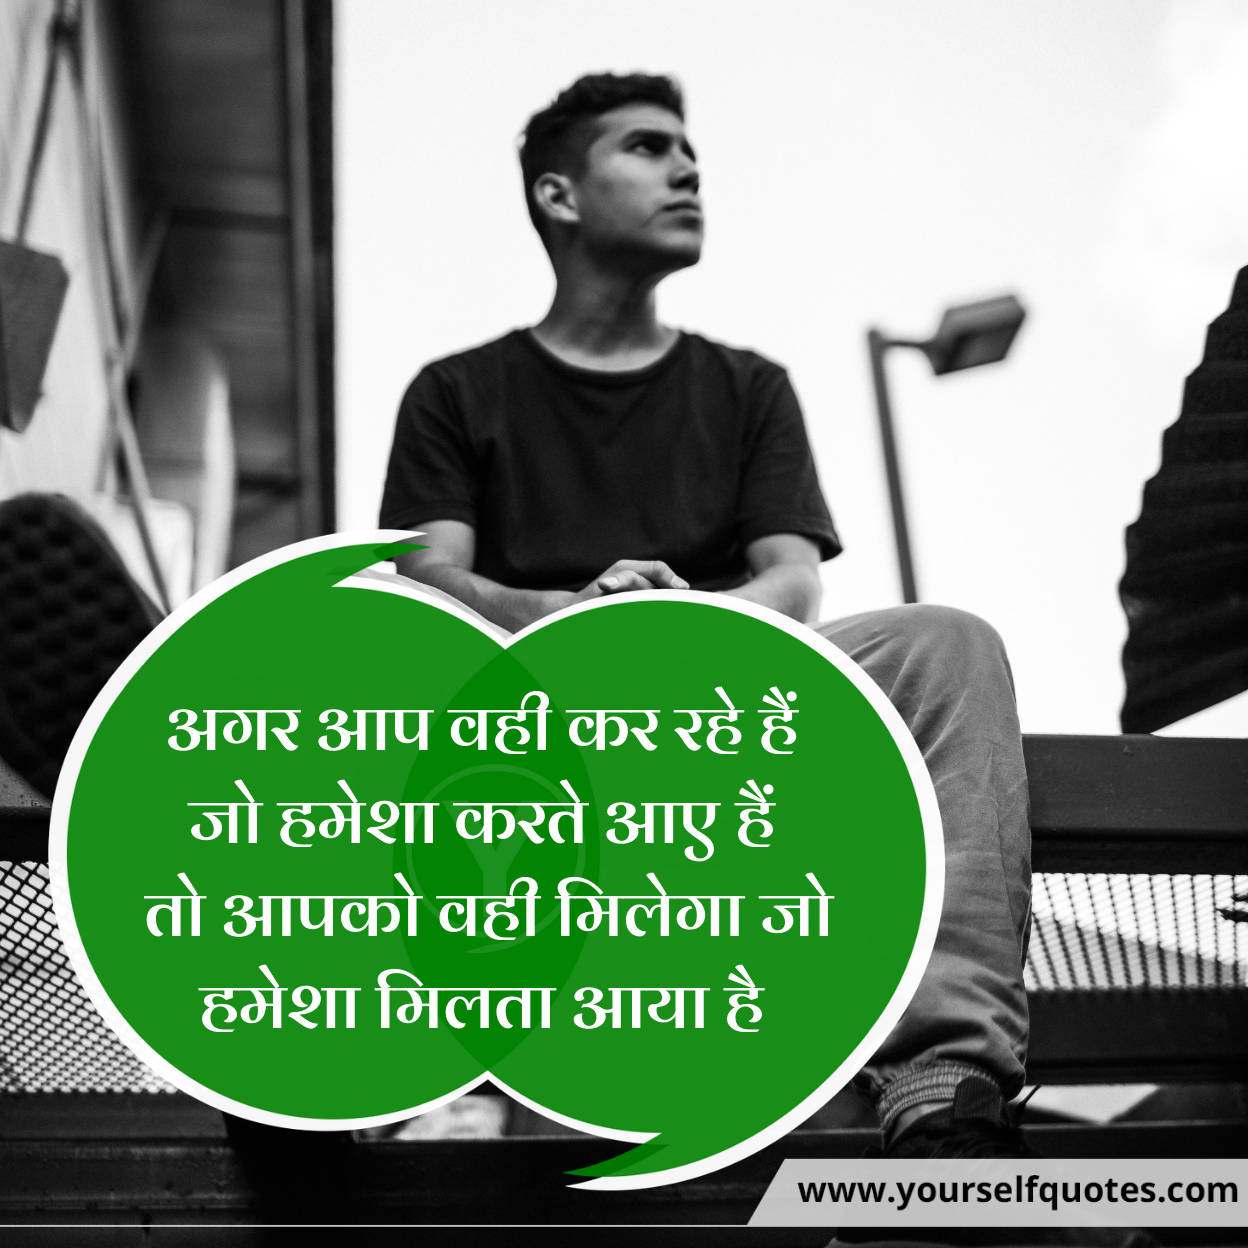 Motivational Quotes In Hindi for Success